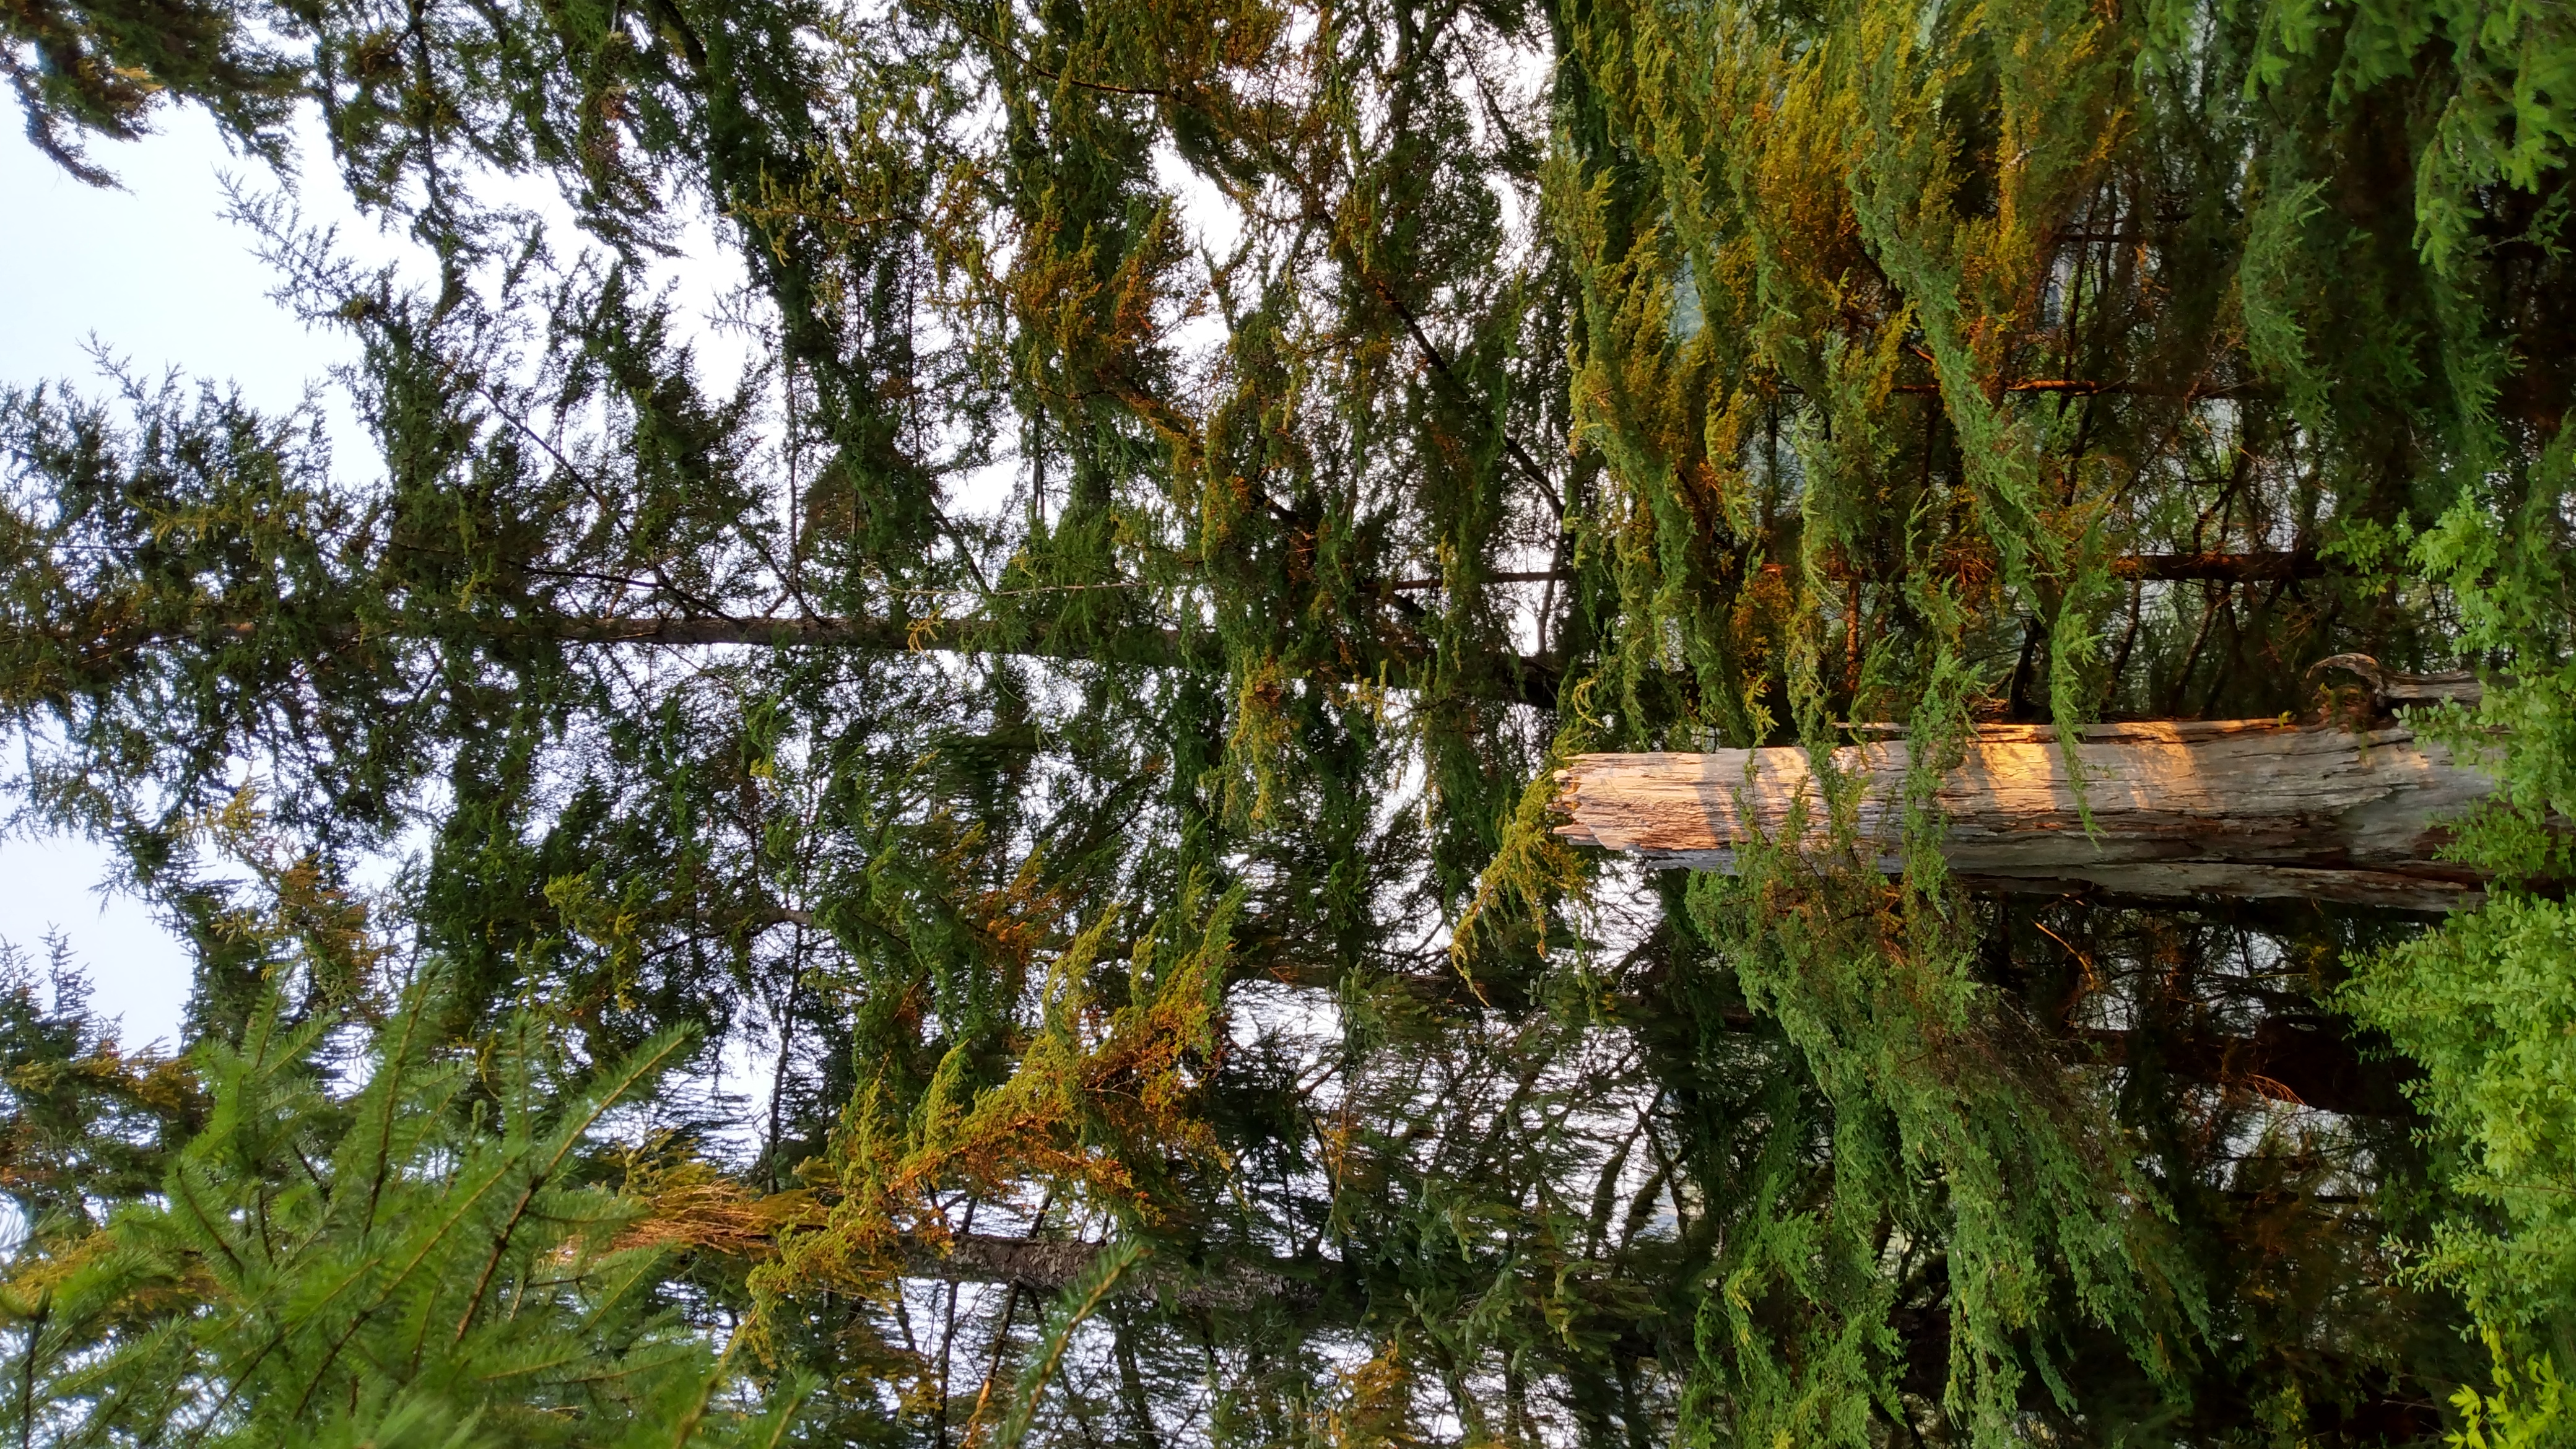 A tree snag (tall dead stump) with orange-yellow sunlight, and other conifers surrouding